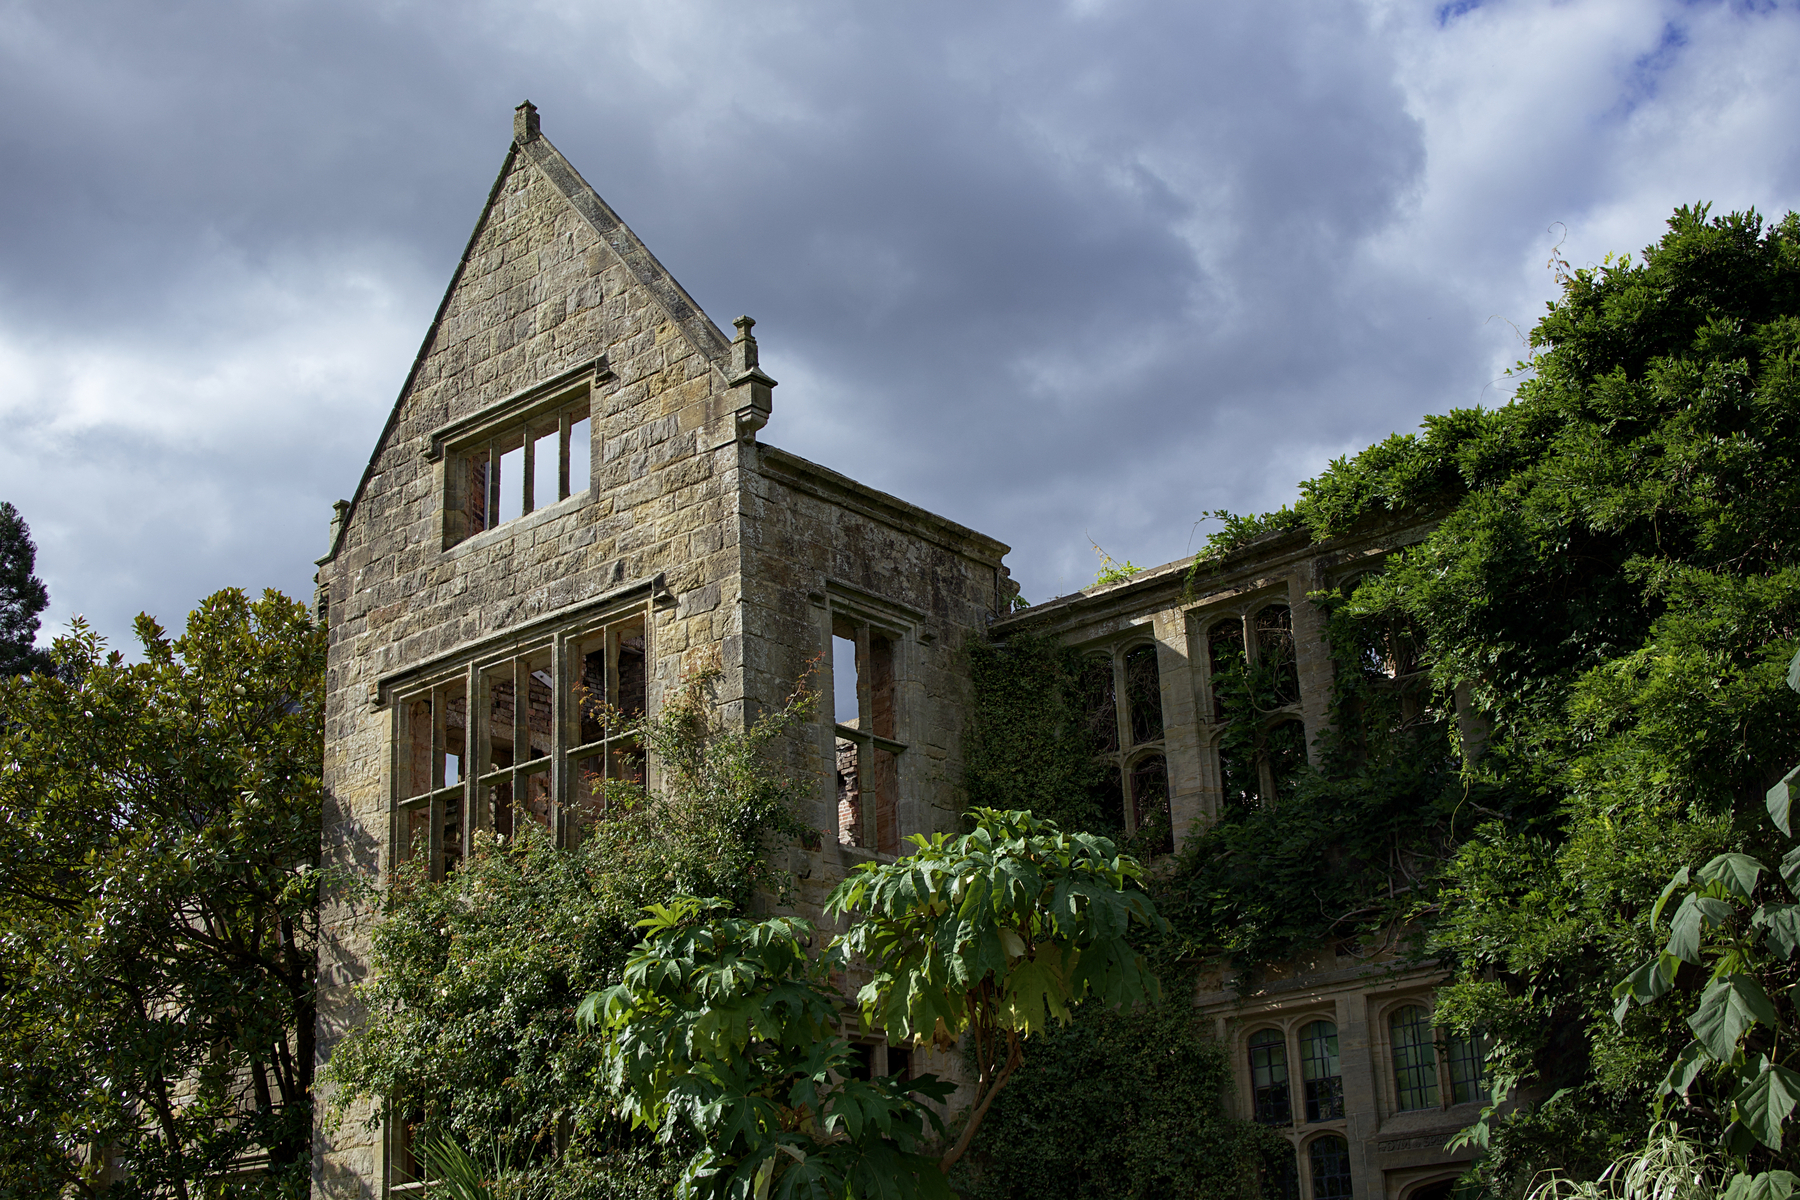 Nymans, a National Trust property in Sussex, UK